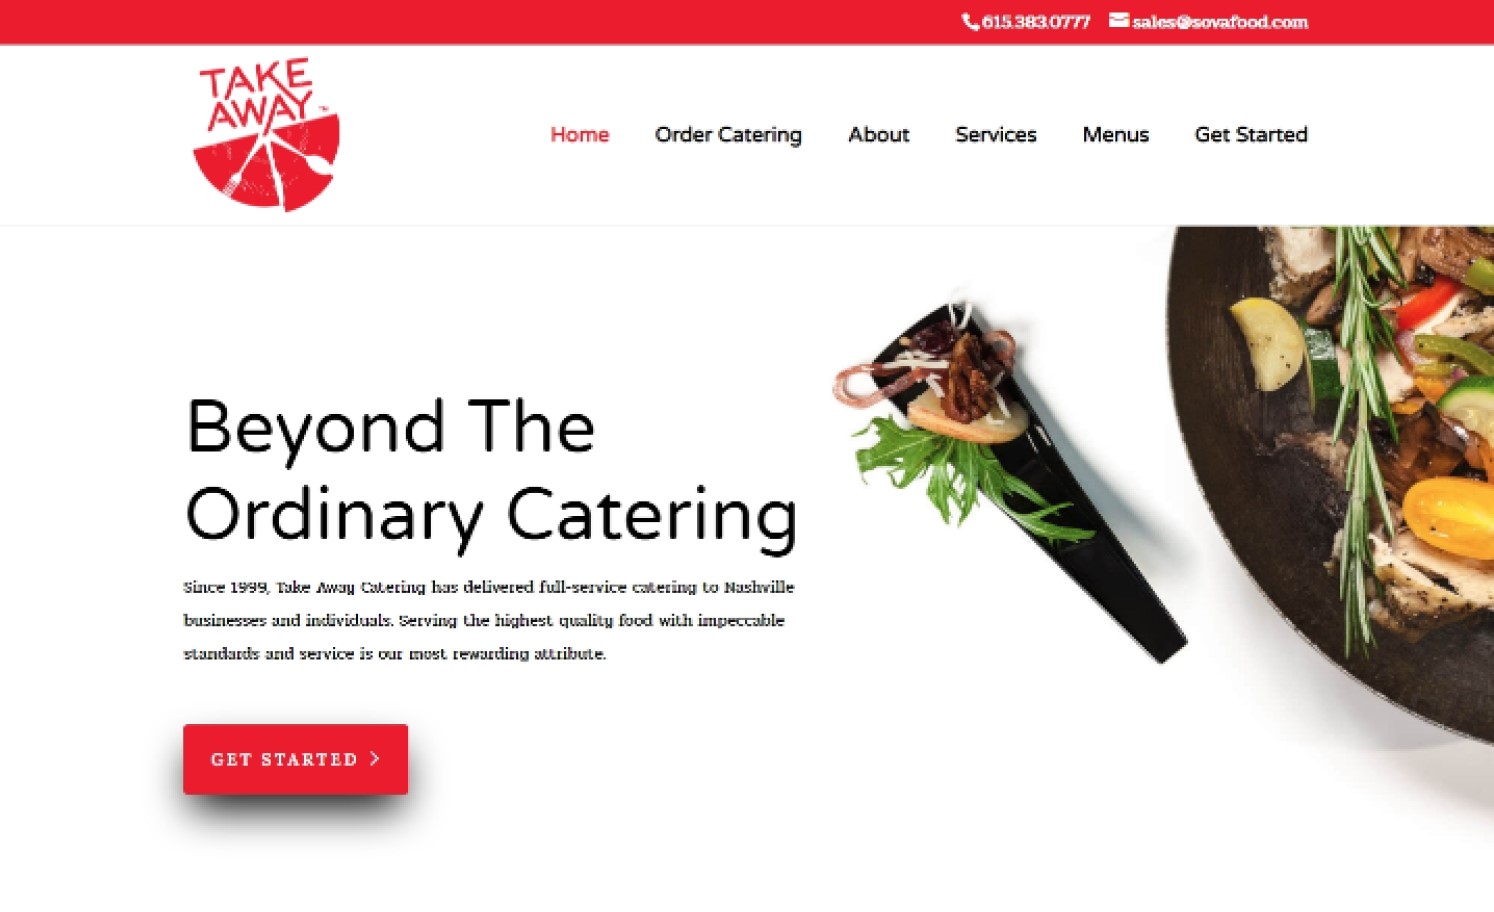 Take Away Catering site